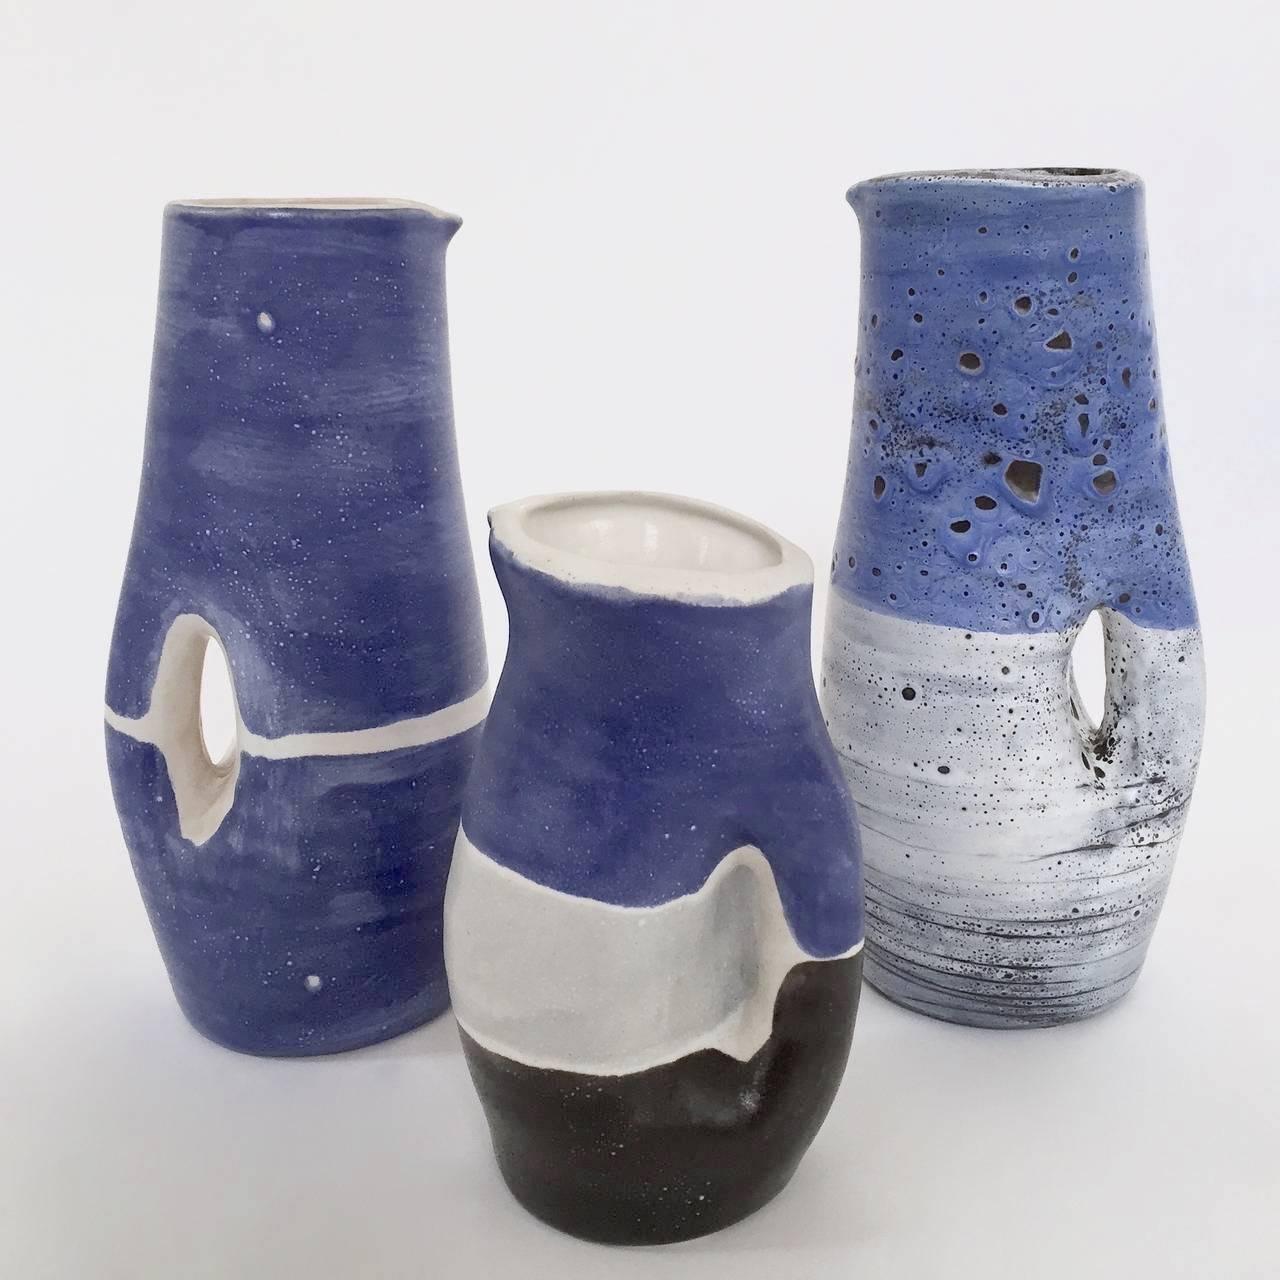 A rare set of 3 earthenware organic shaped pitchers glazed in shades of cloudy and deep blue, grey and white. 

Two of the three pieces are signed M.J on the bottom.
France, circa 1955-60

The dimensions approx. are : 
Largest pieces : H 32 cm